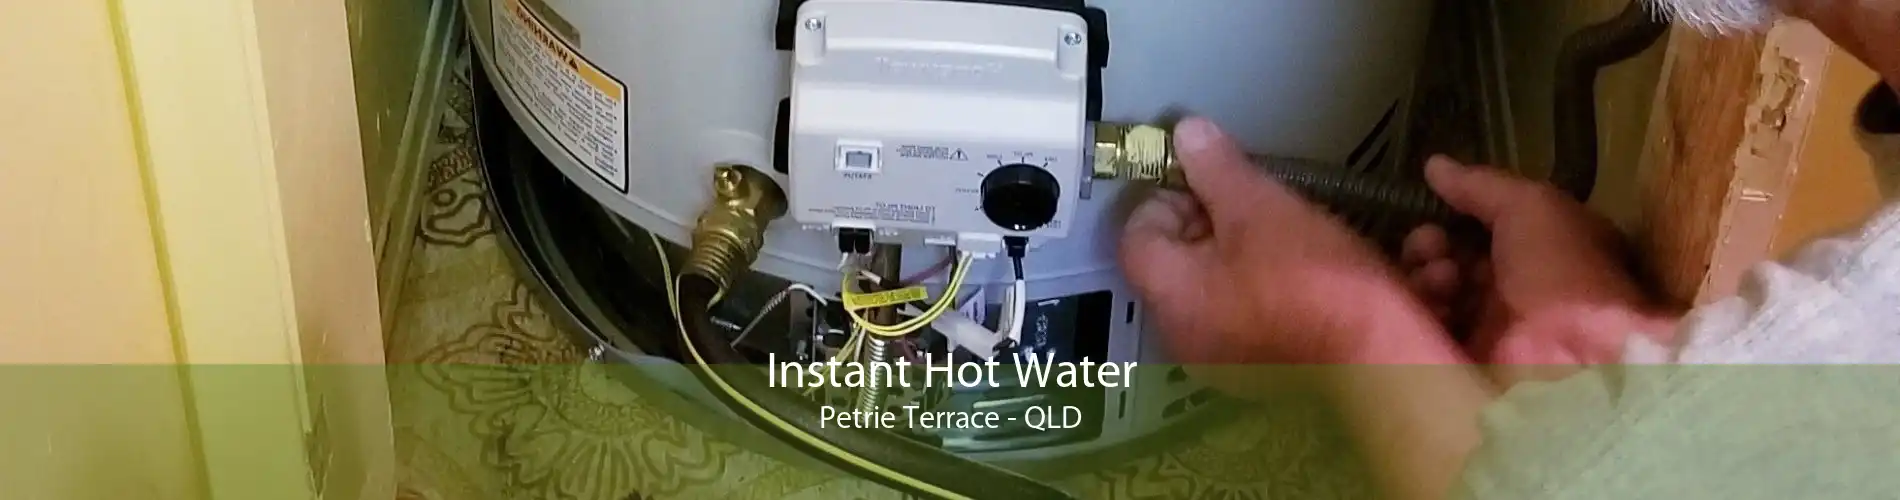 Instant Hot Water Petrie Terrace - QLD